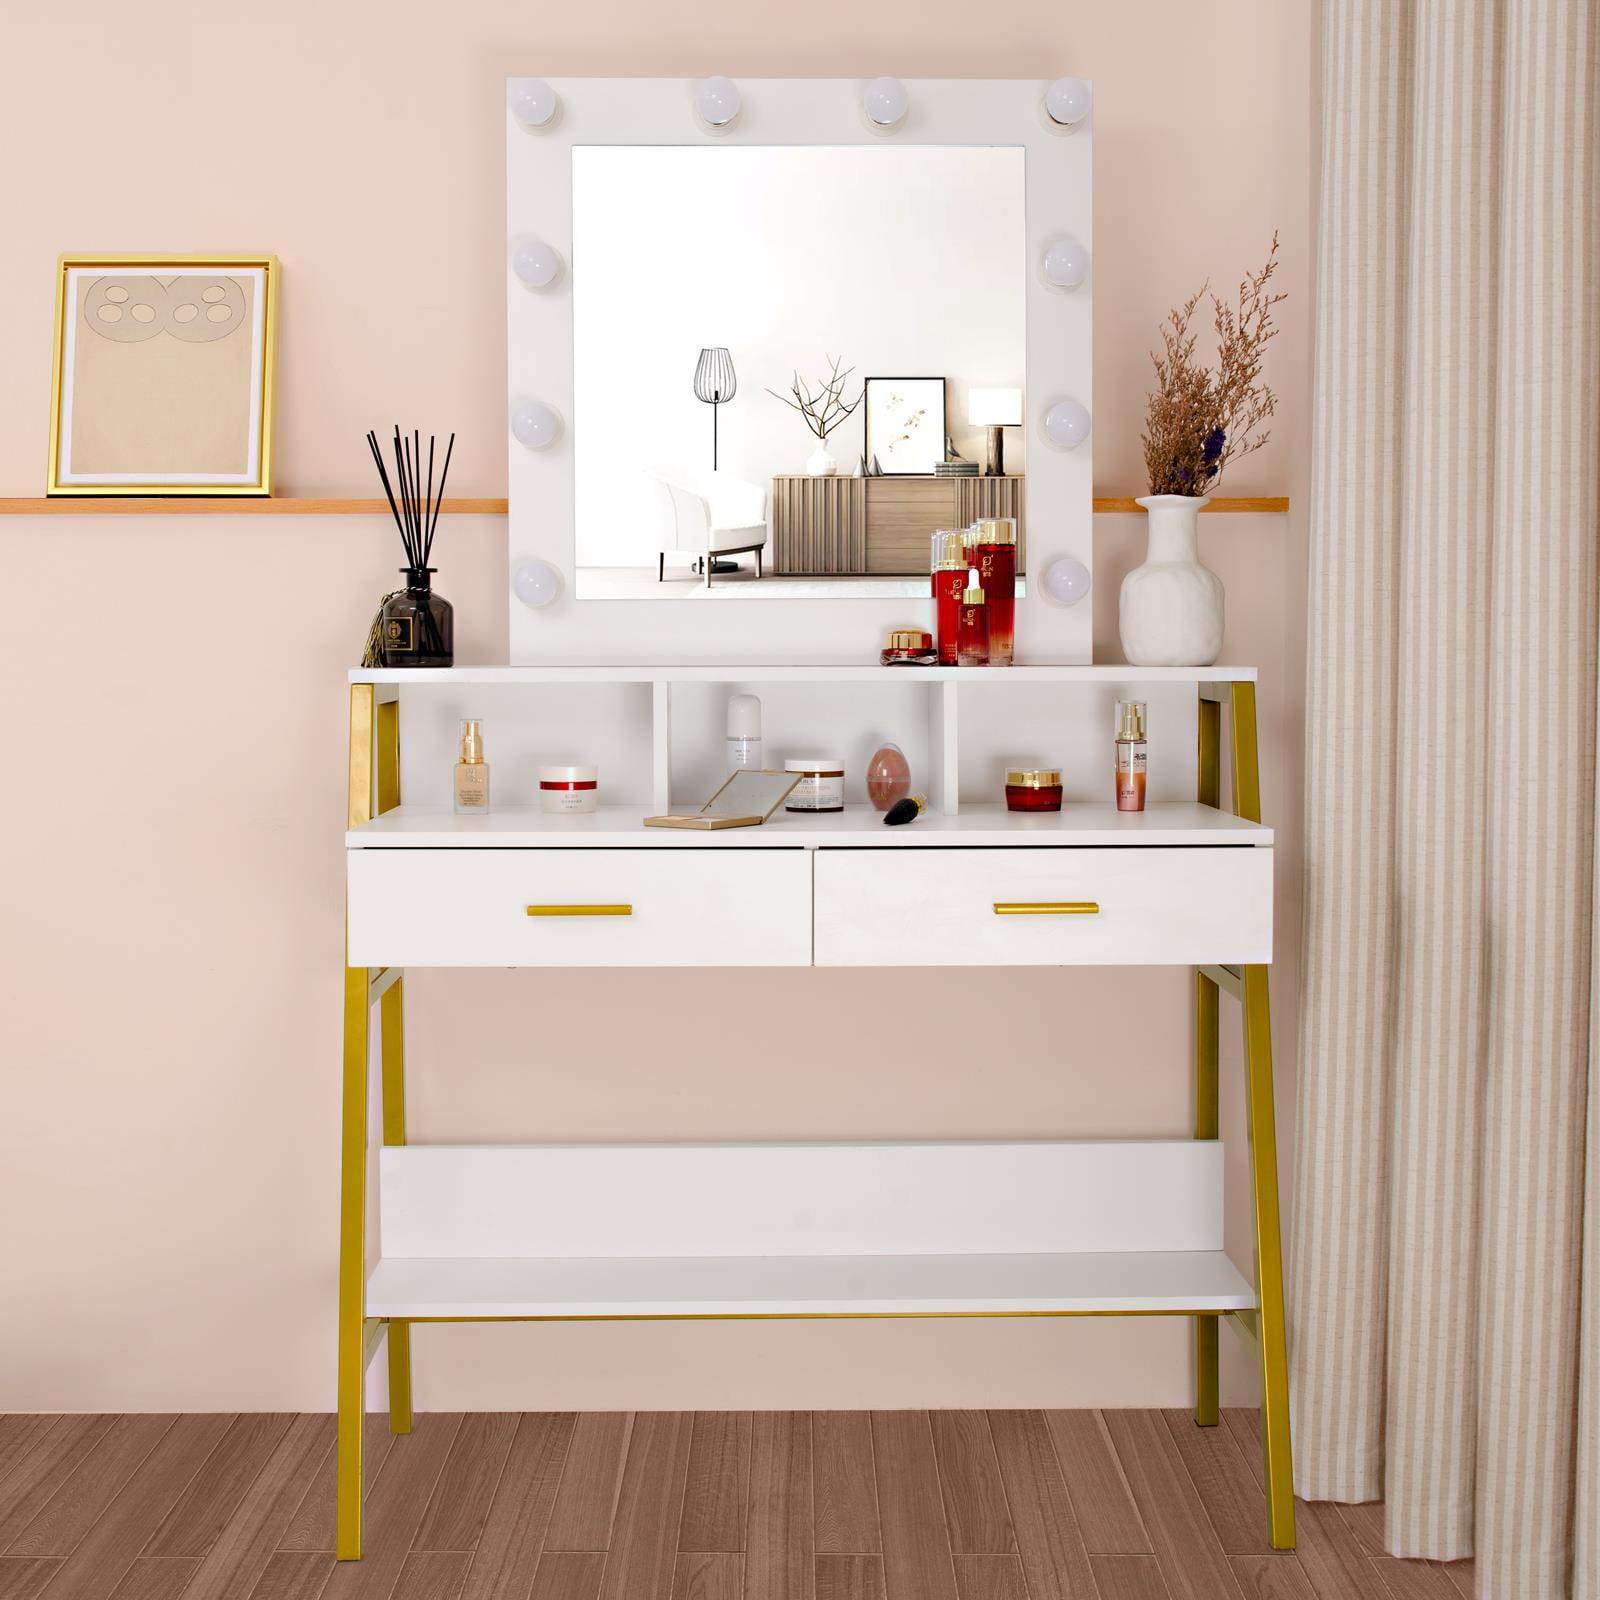 Fashionable Vanity Tables With Mirrors